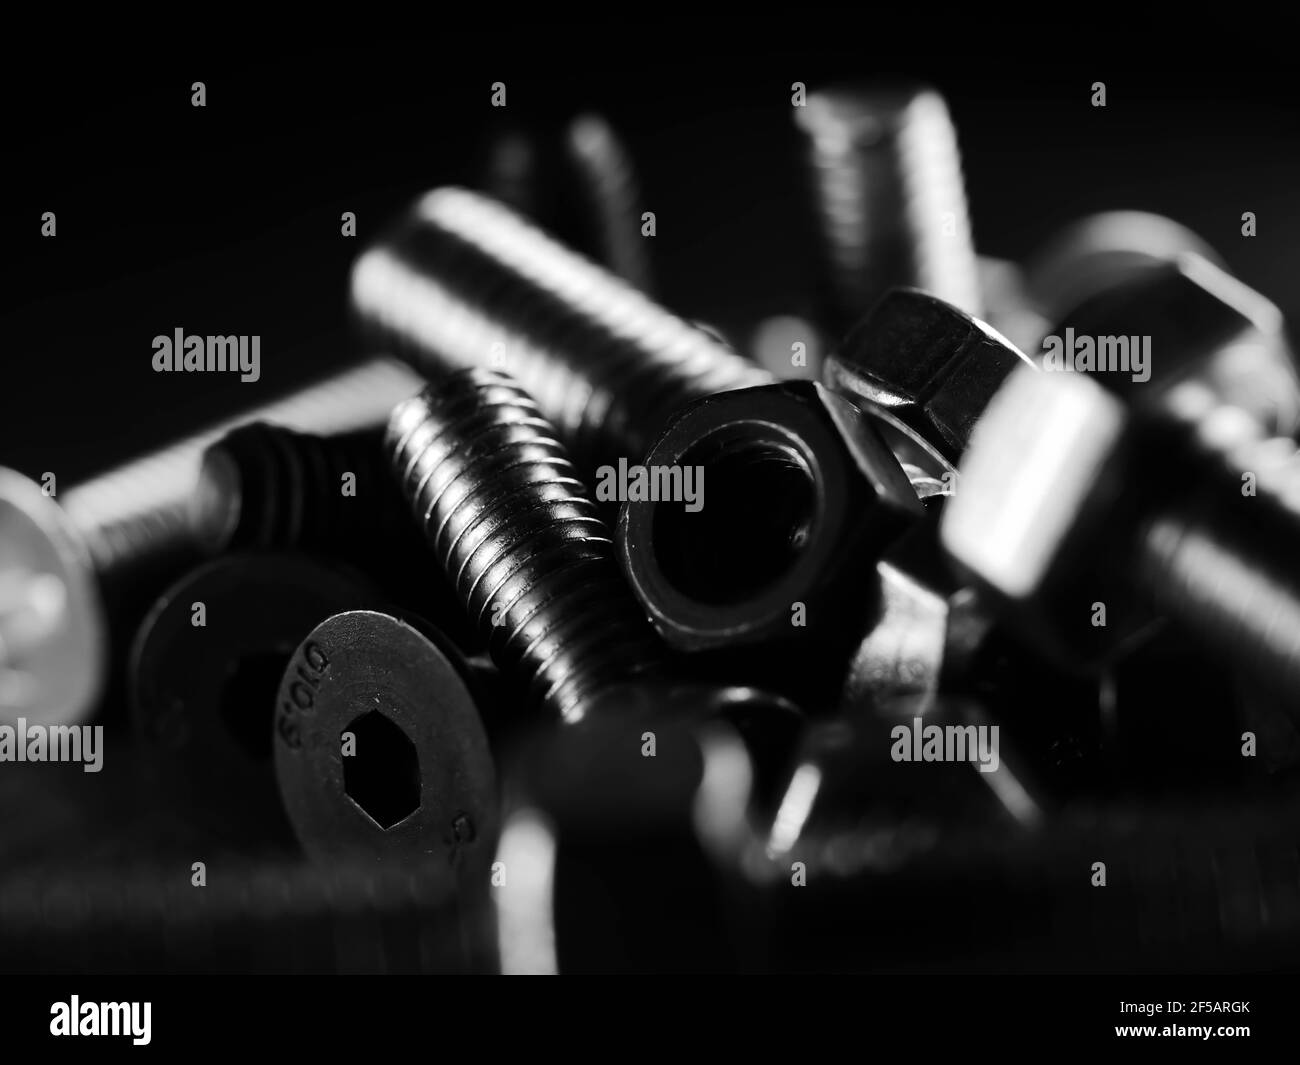 Close-up of various steel nuts and bolts Stock Photo